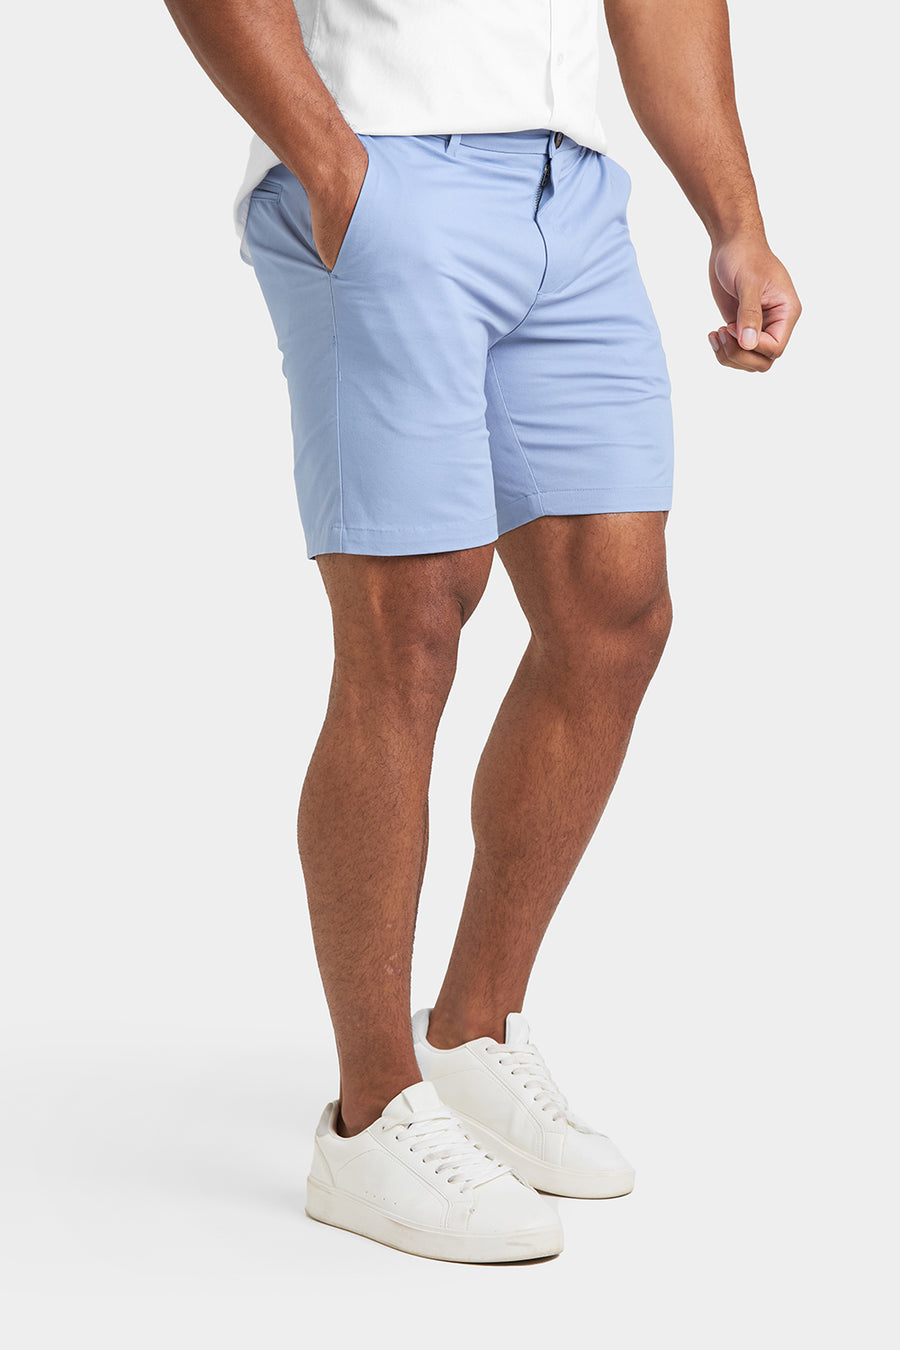 Athletic Fit Chino Shorts 7'' in Light Blue - TAILORED ATHLETE - USA